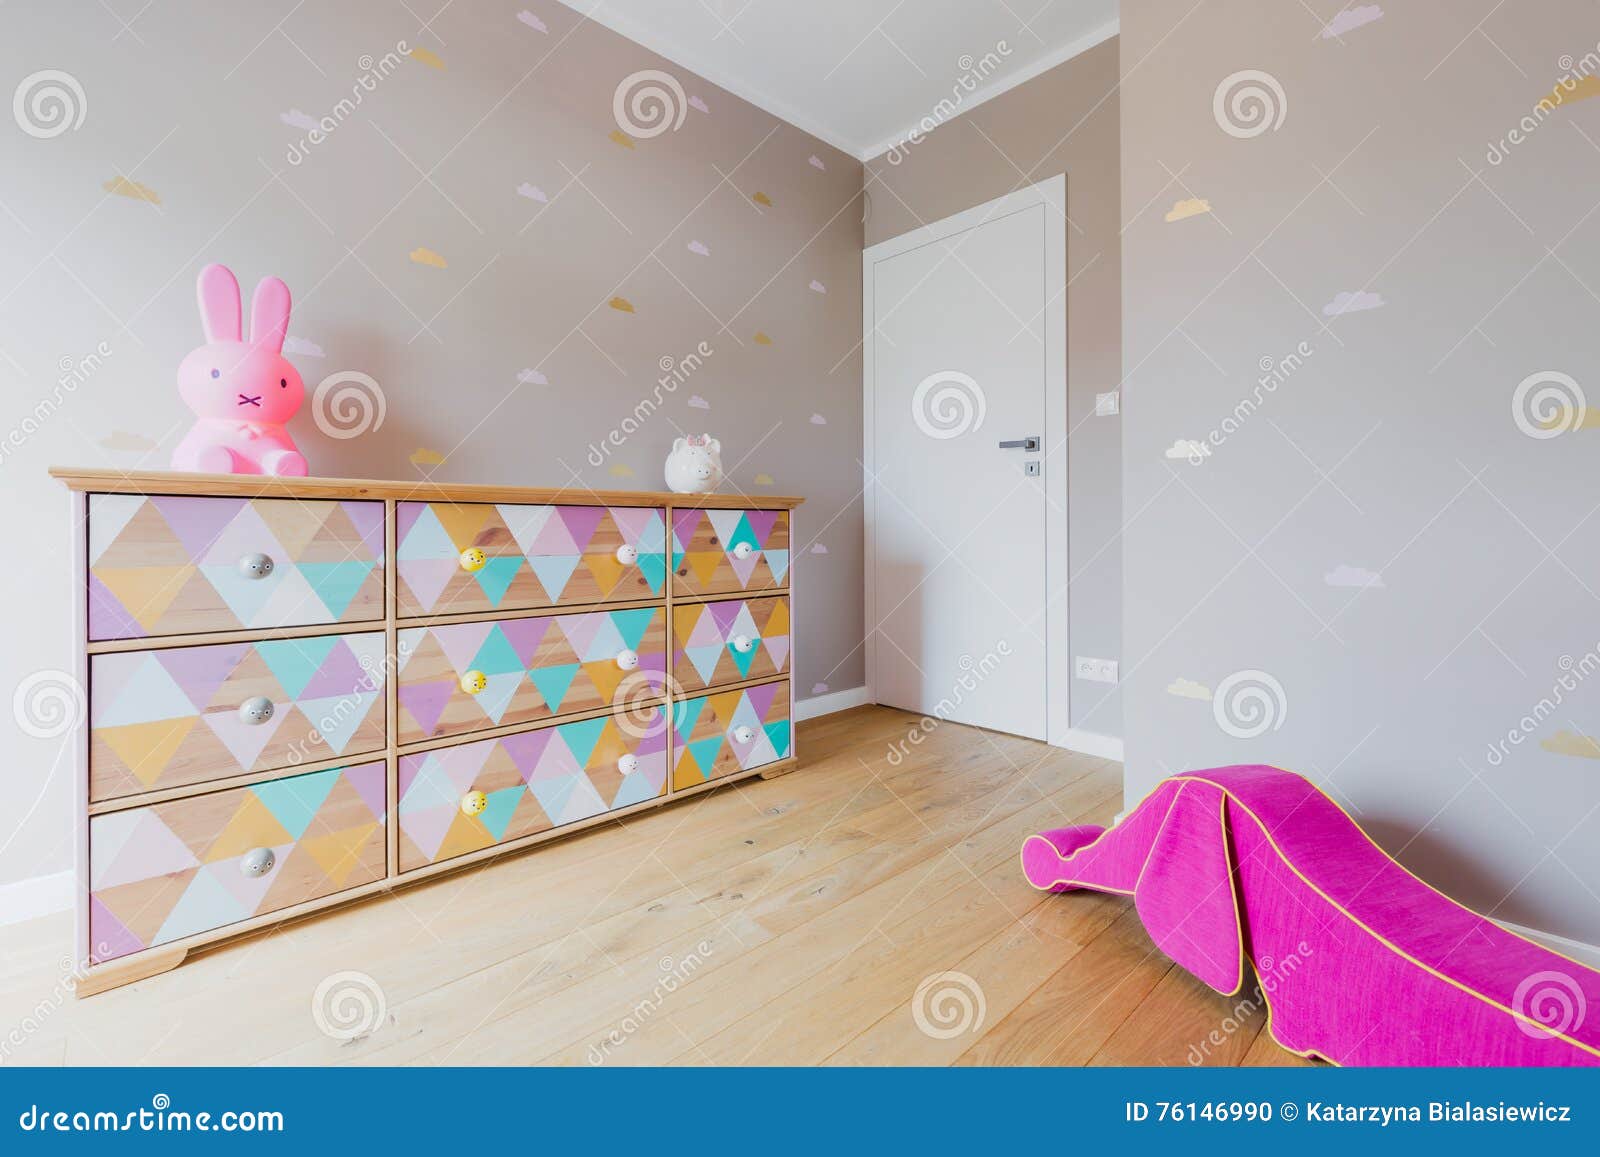 Creative Ideas For A Little Girl S Room Stock Photo Image Of